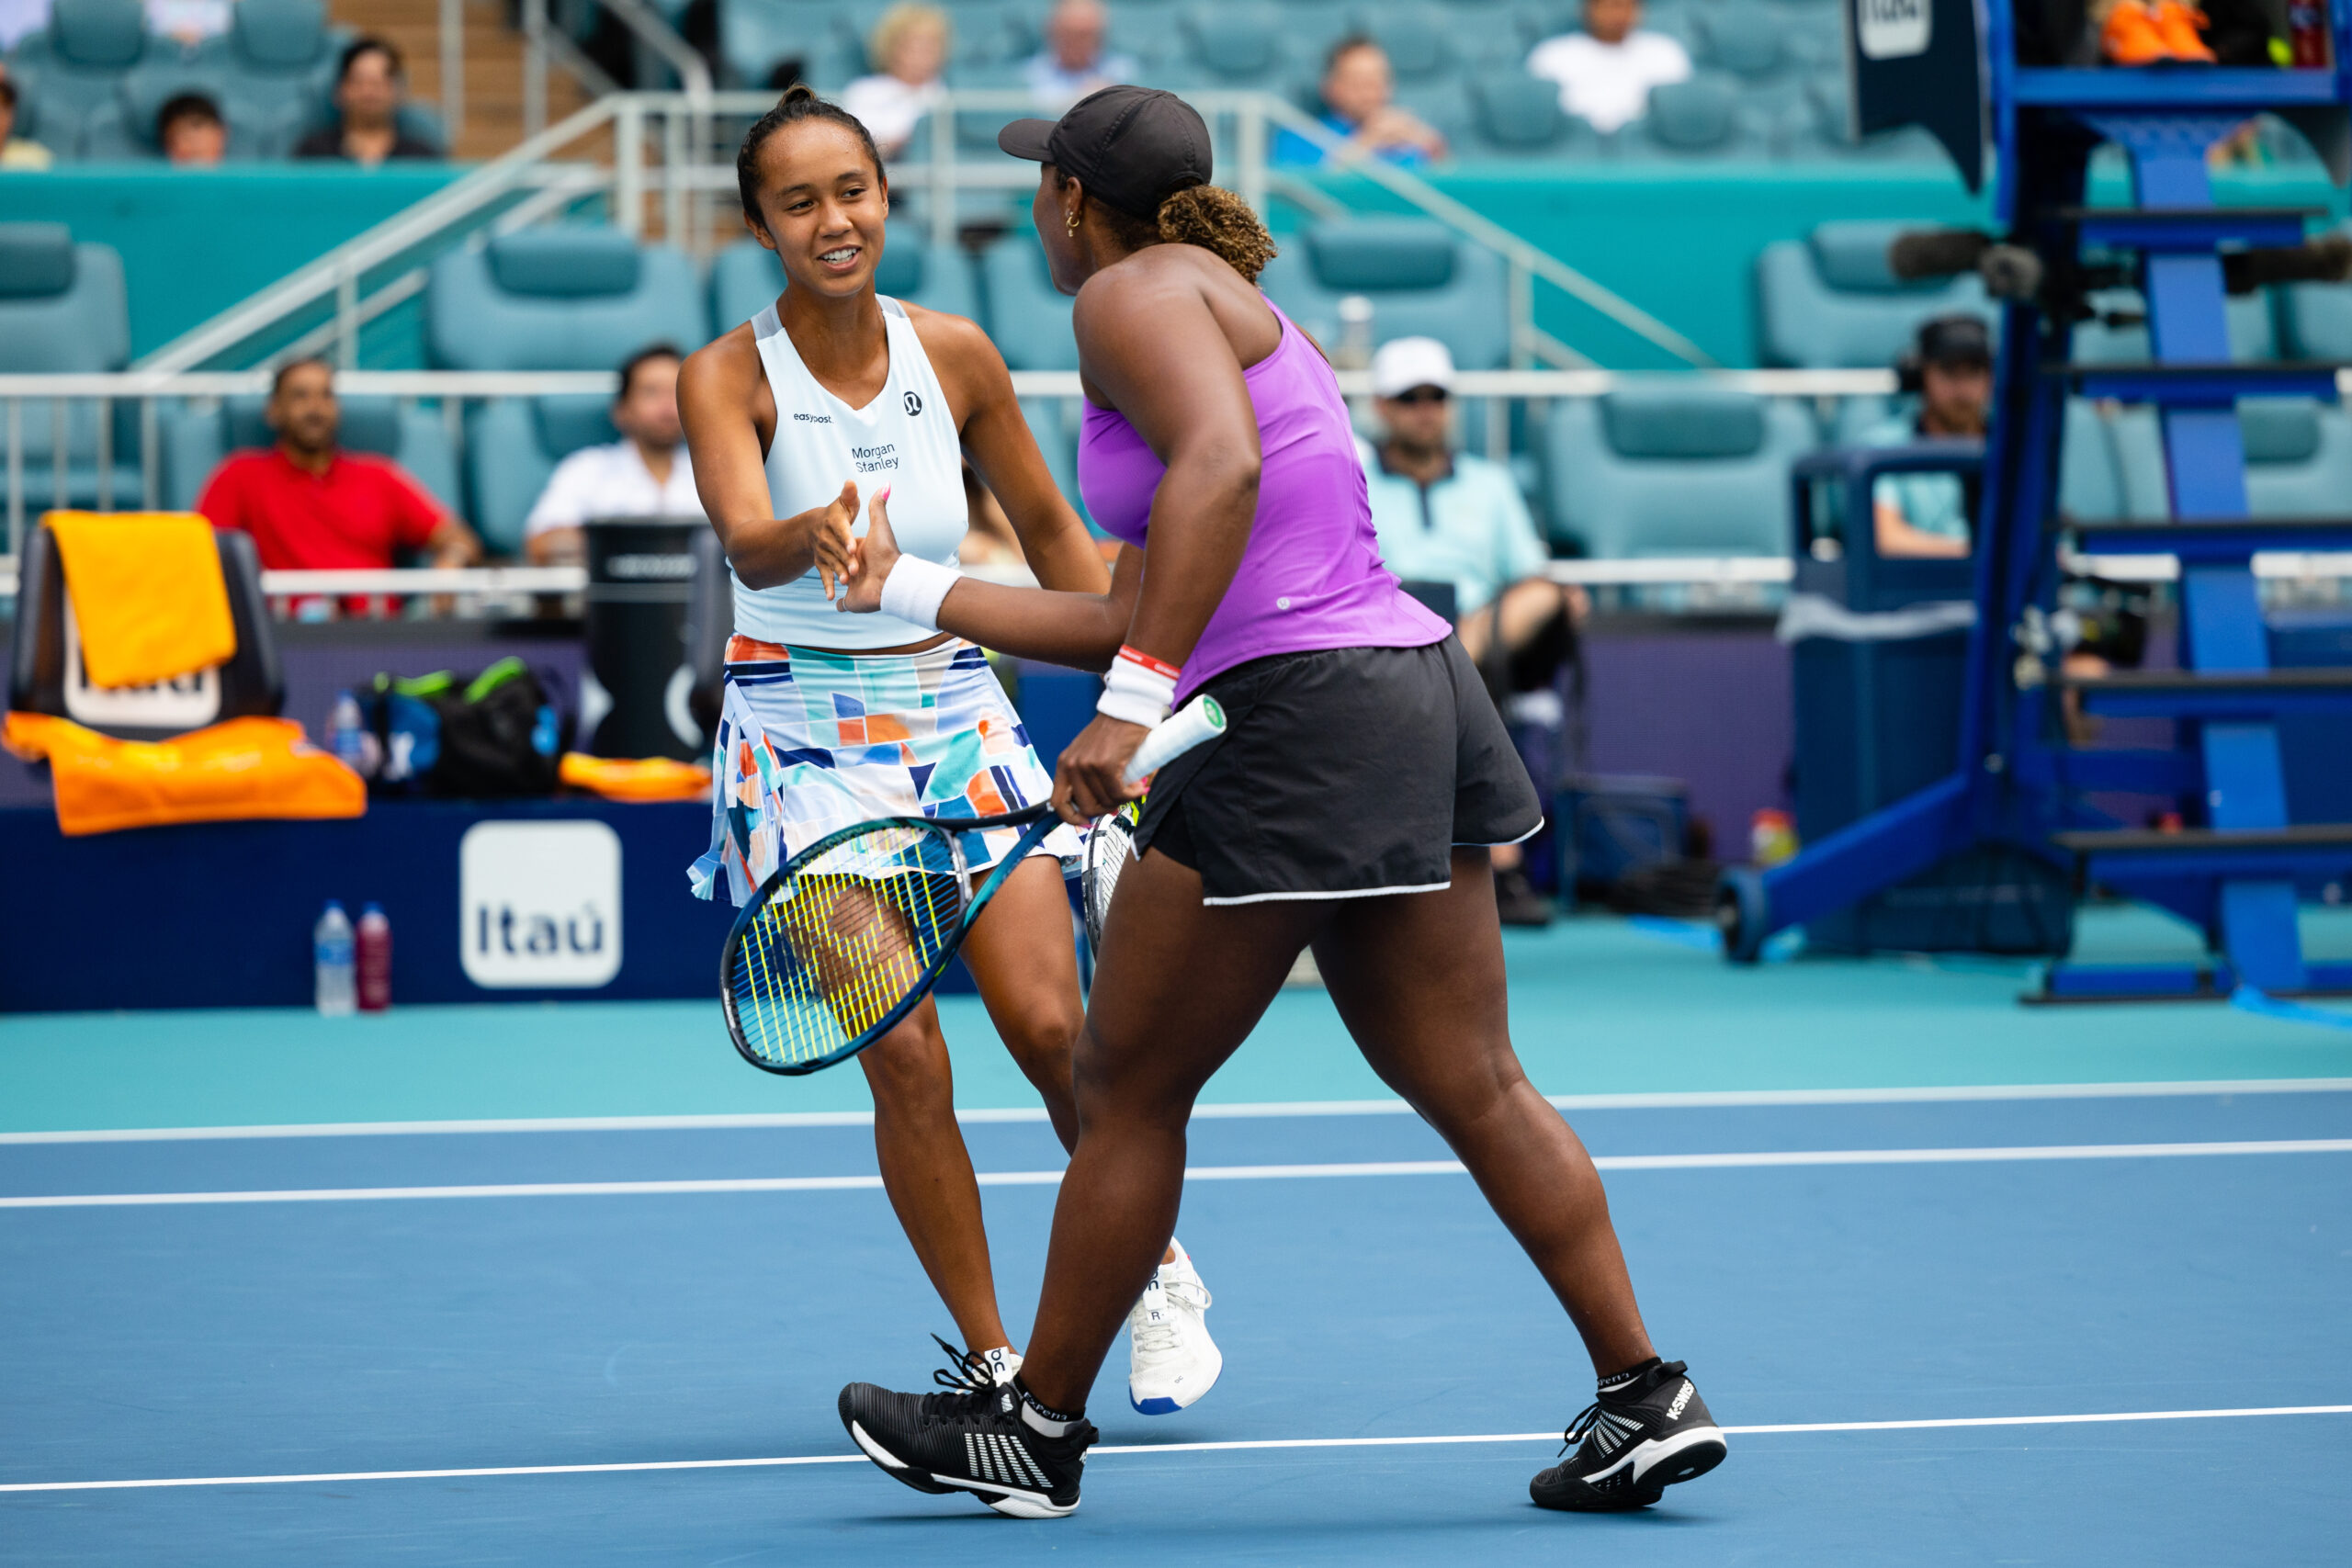 Leylah Fernandez and Taylor Townsend having a good time during the 2023 Miami Open Women's Doubles Final on April 2, 2023.